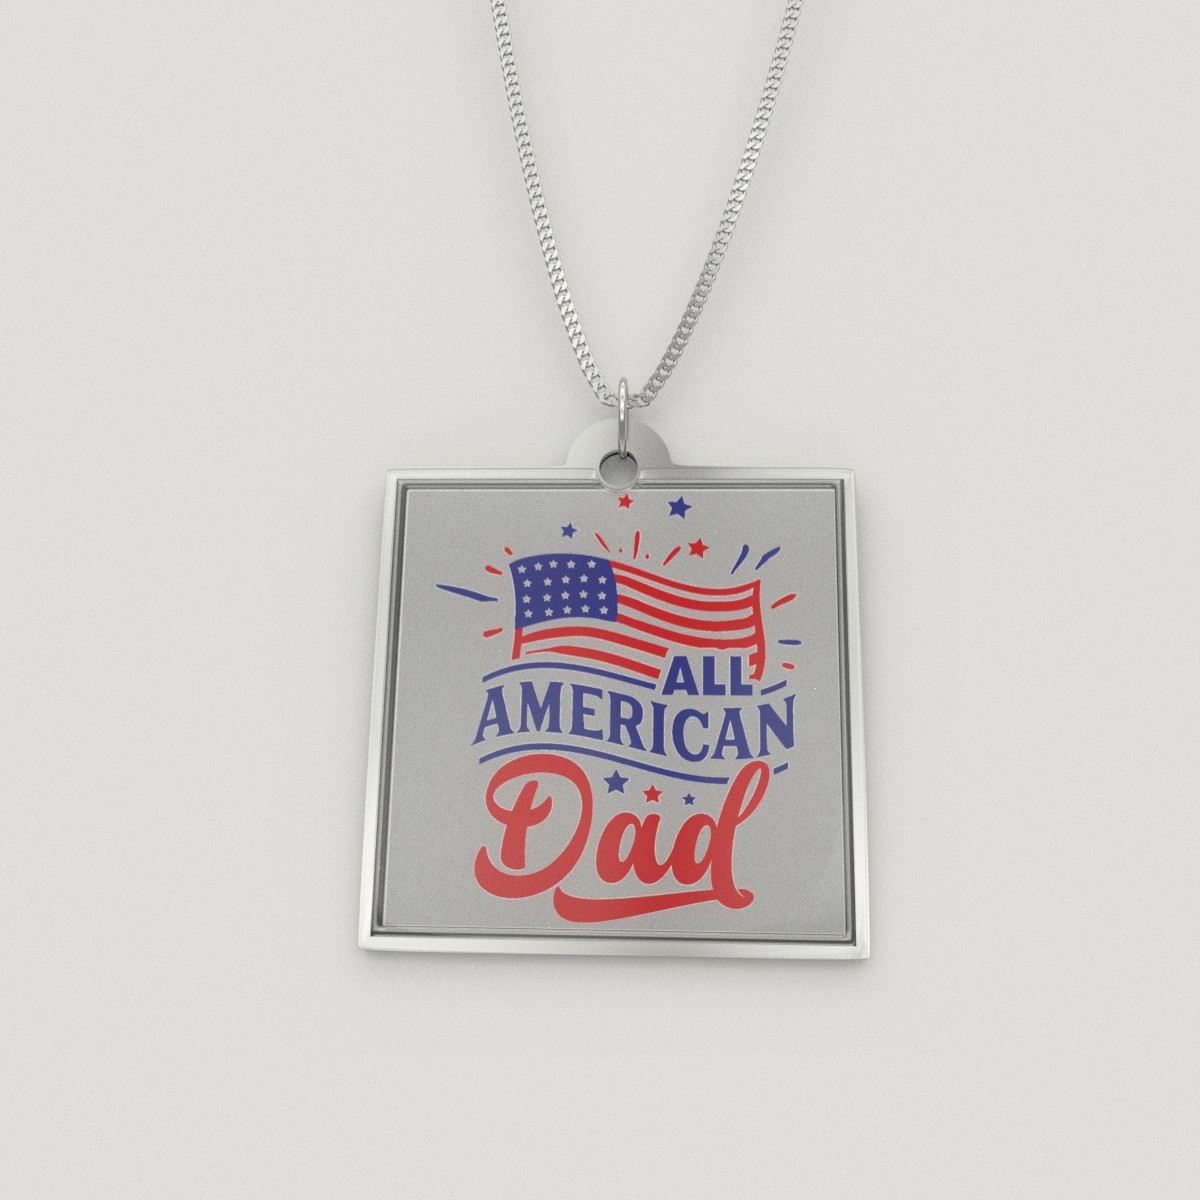 All American Dad Pendant Necklace